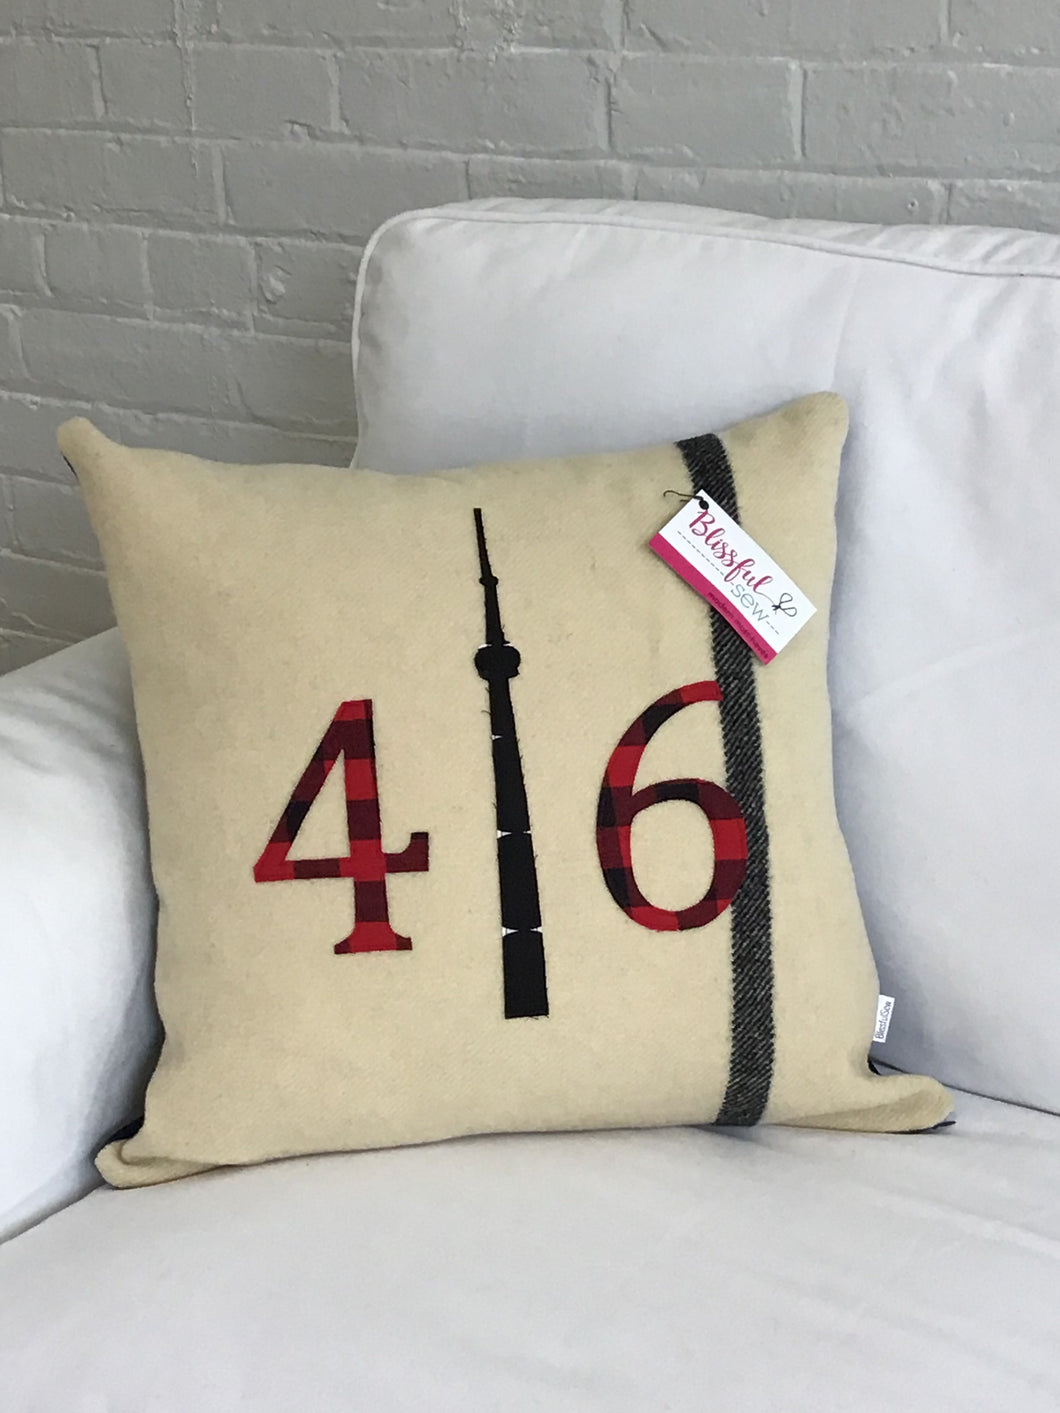 Felted Wool Blanket Pillow - Cream colored background with solid black stripe up the side.  Red plaid numbers and black CN Tower.